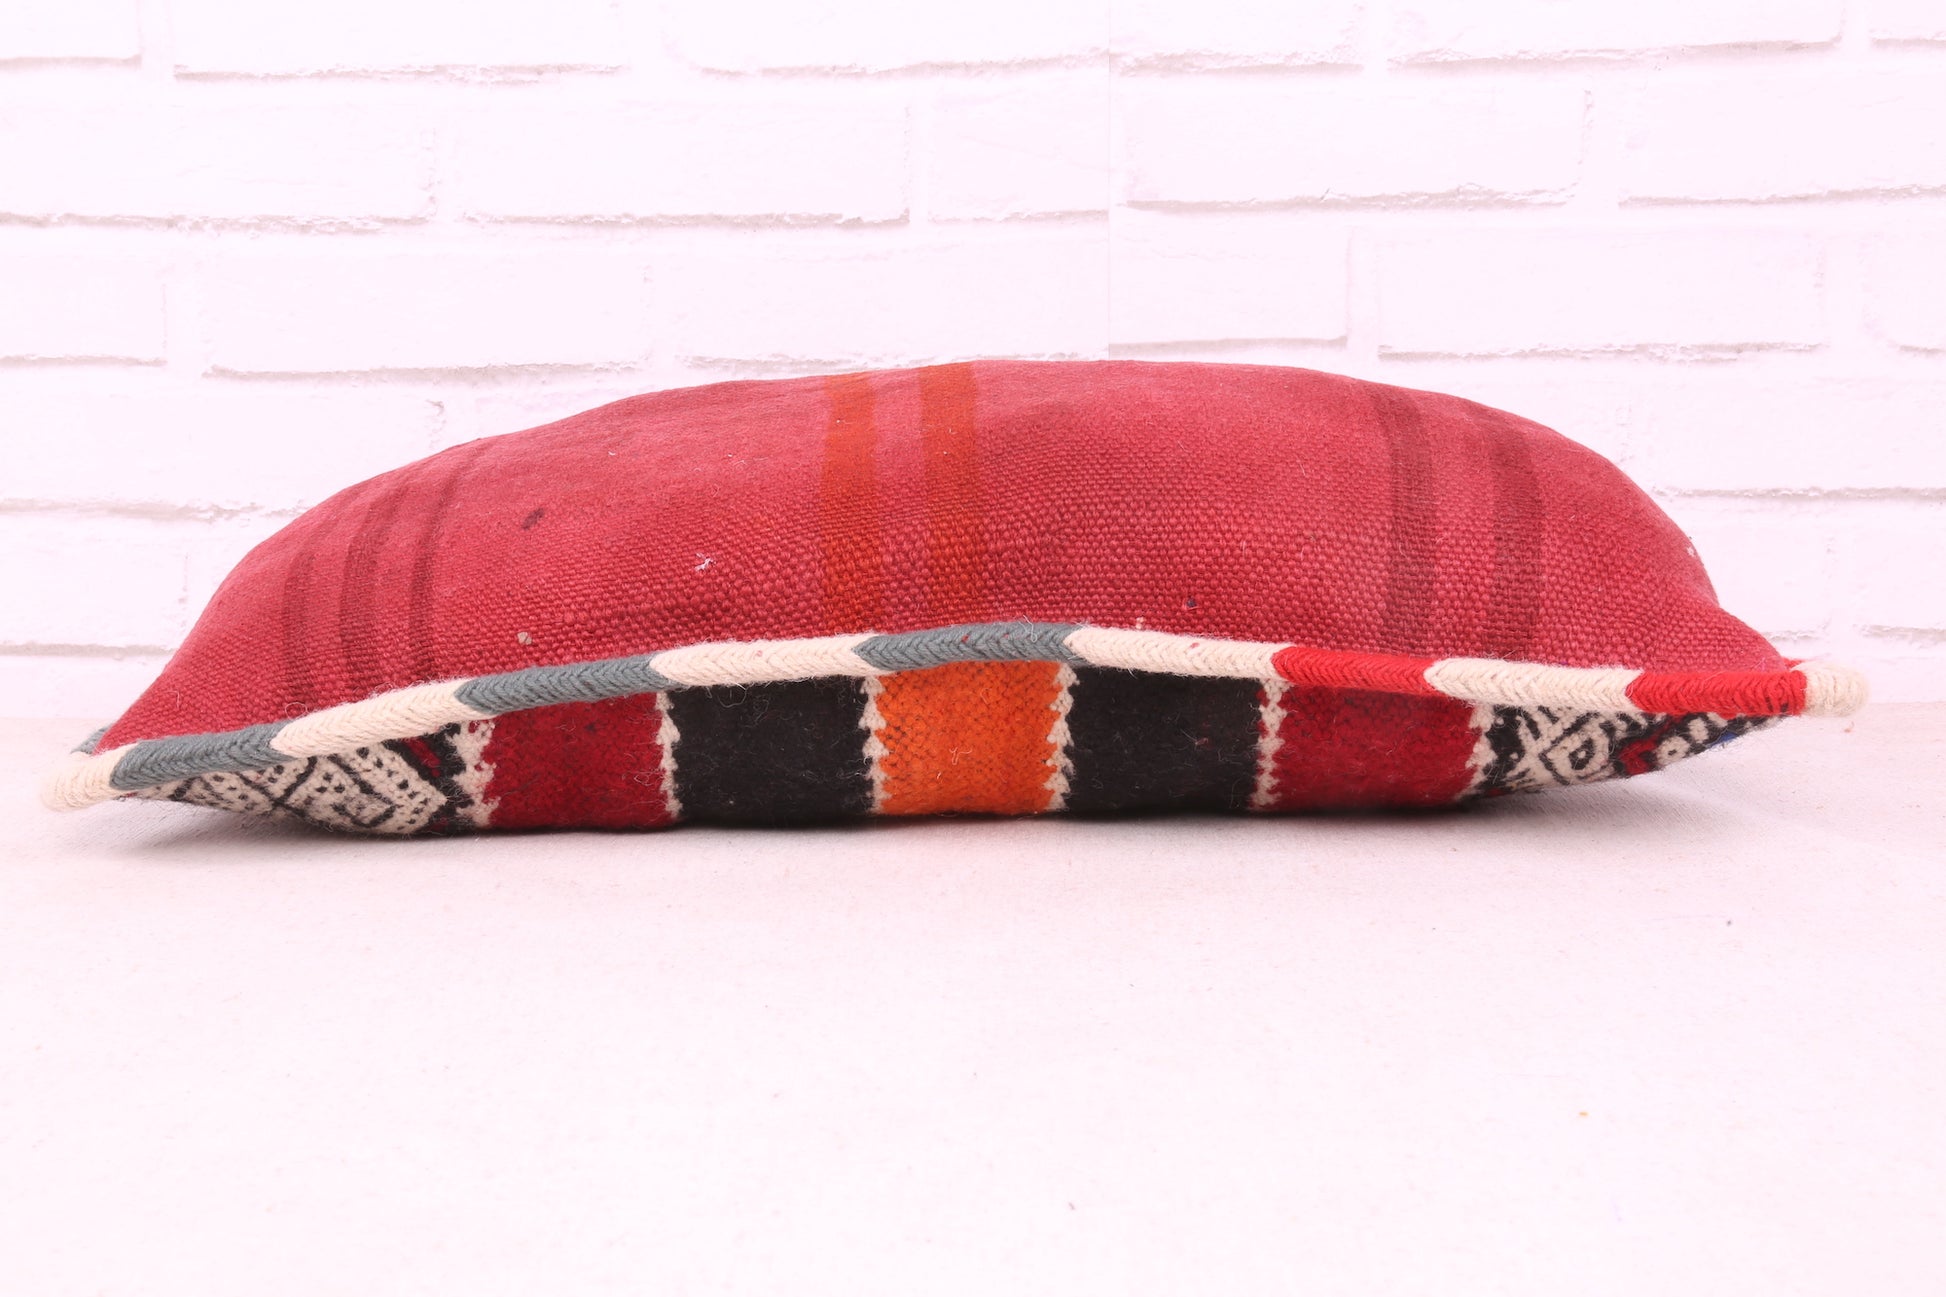 Berber Striped Pillow 13.7 inches X 23.6 inches